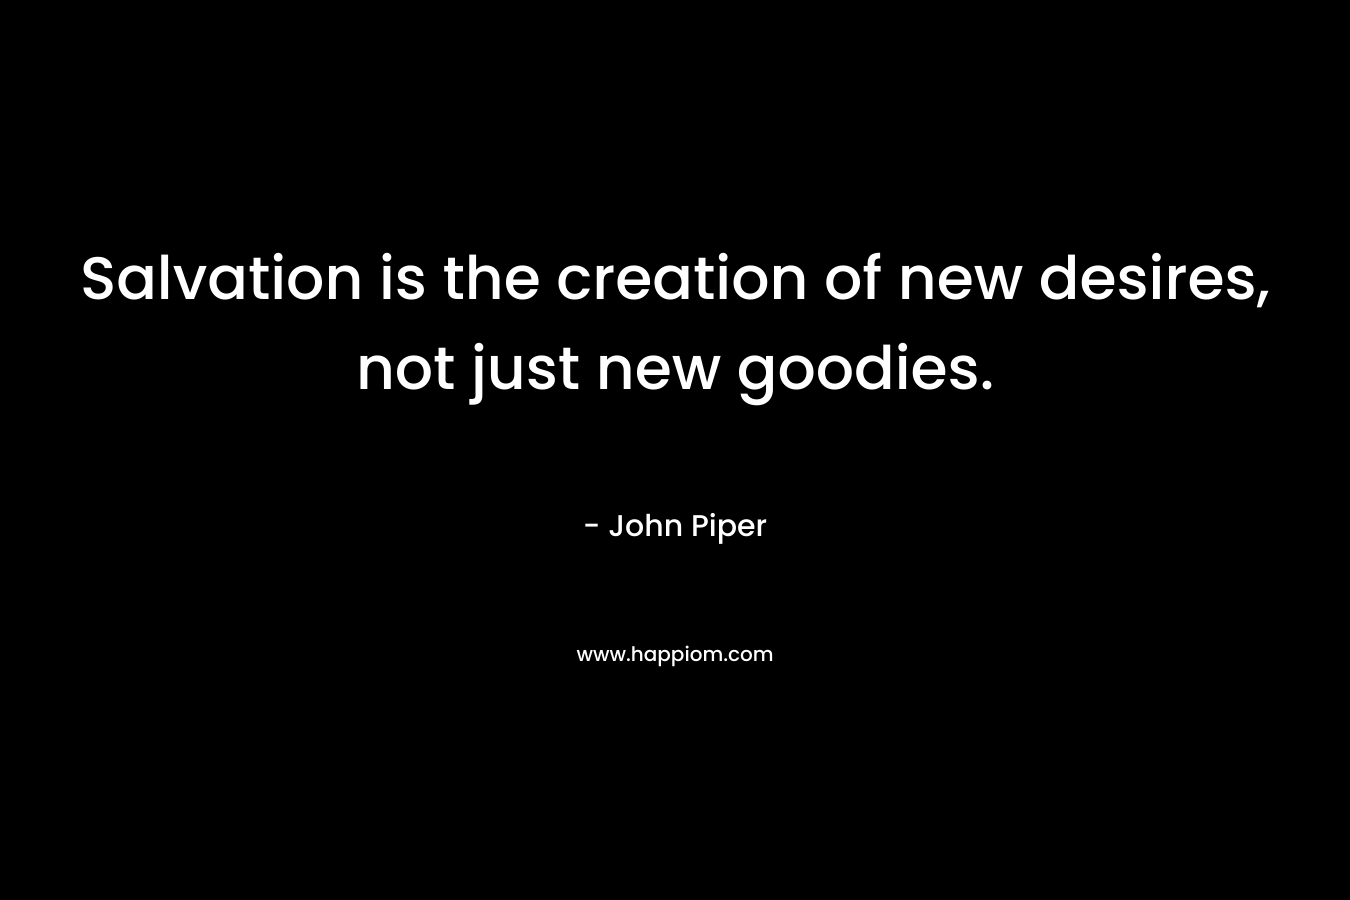 Salvation is the creation of new desires, not just new goodies.